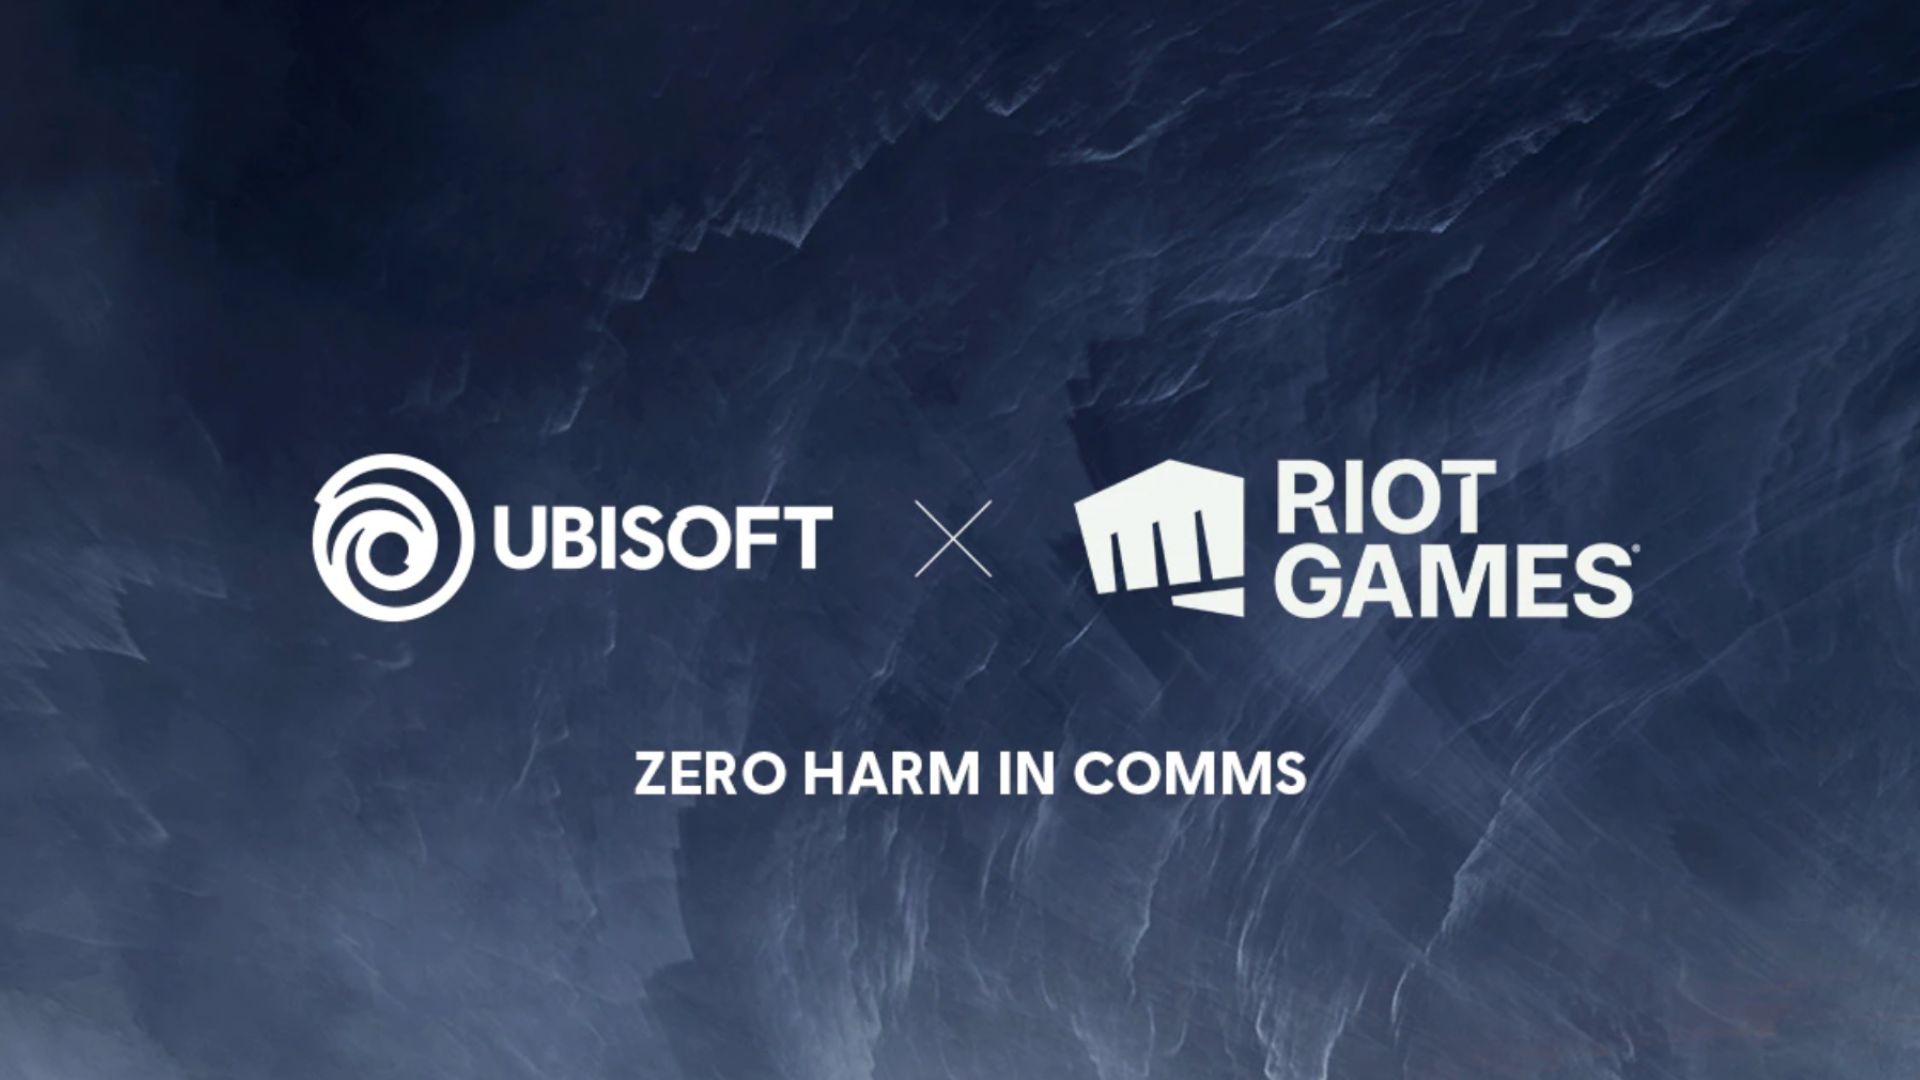 Riot Games and Ubisoft Team Up to Combat Harmful Content in Game Chats